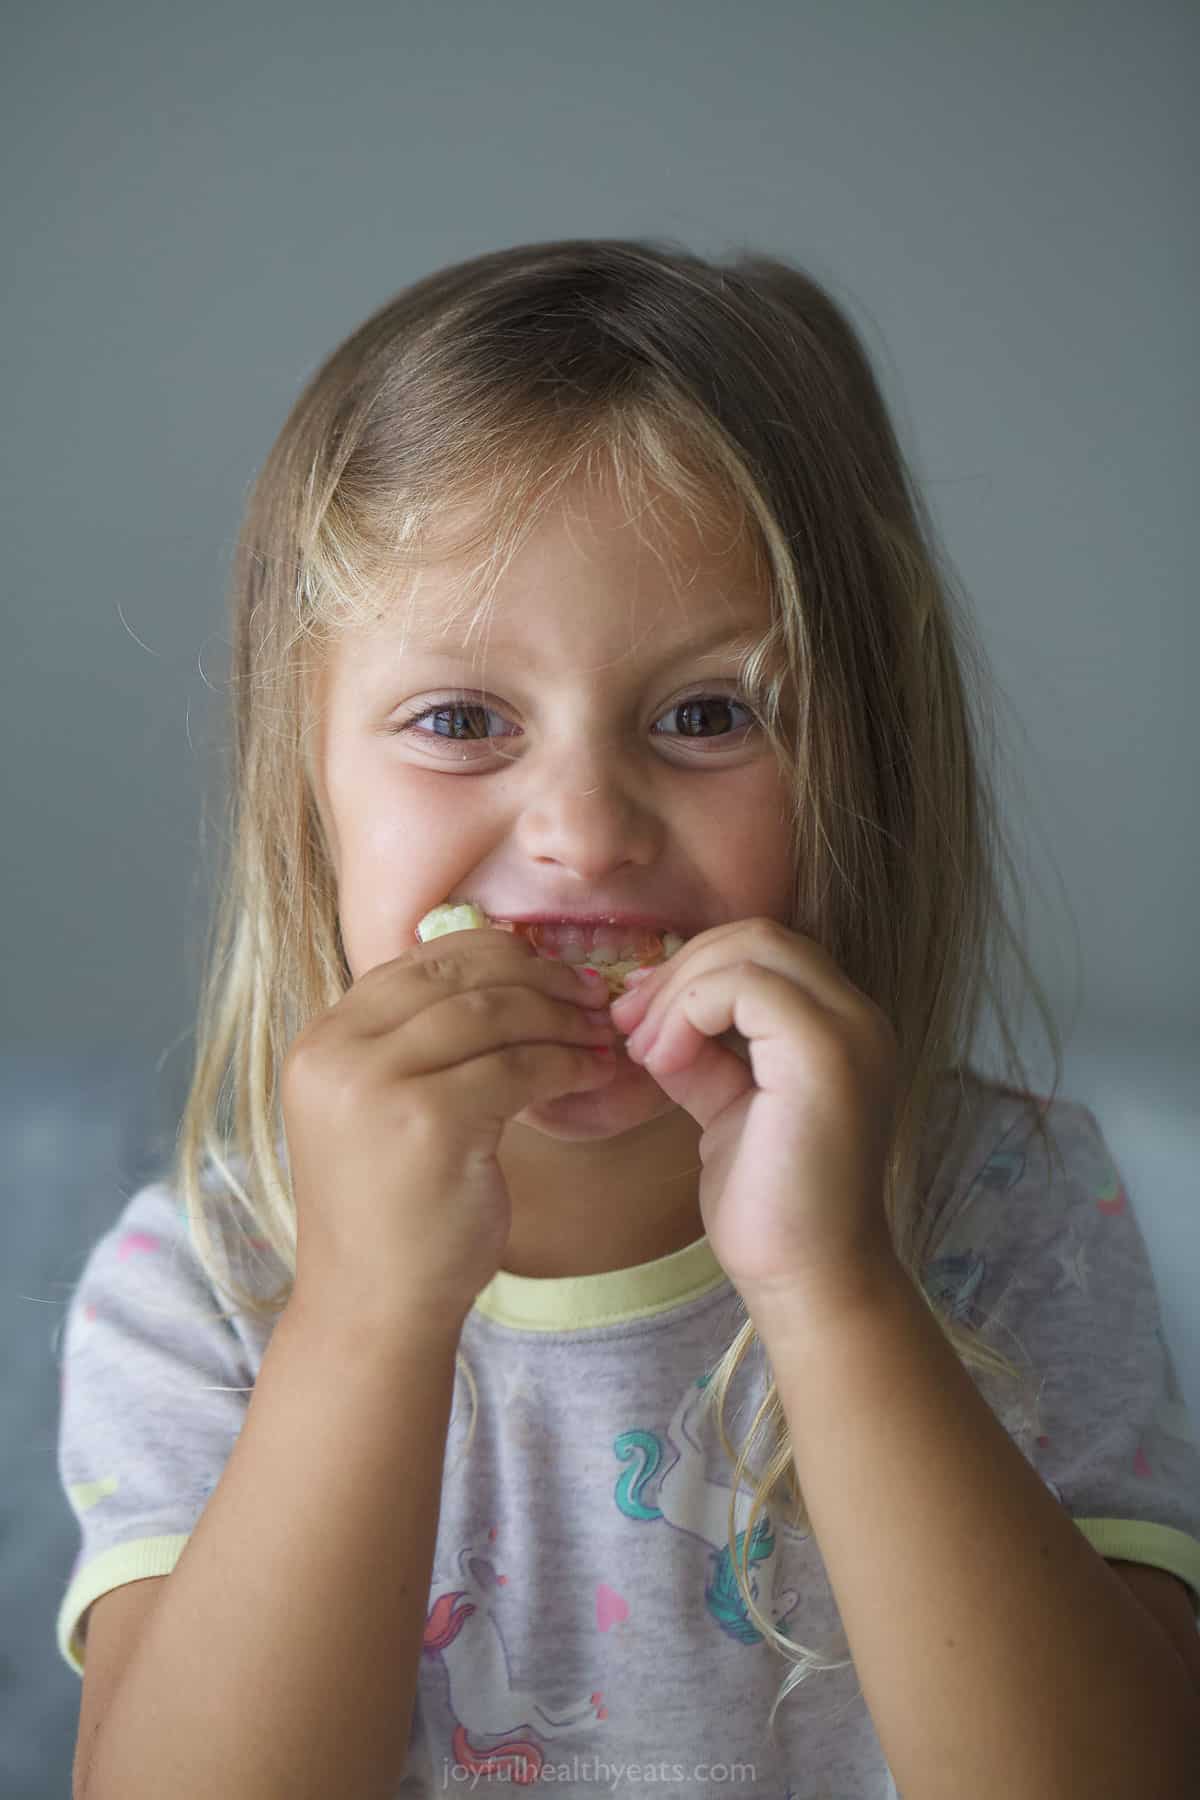 Krista's daughter eating a dip-filled pita chip with a smile on her face